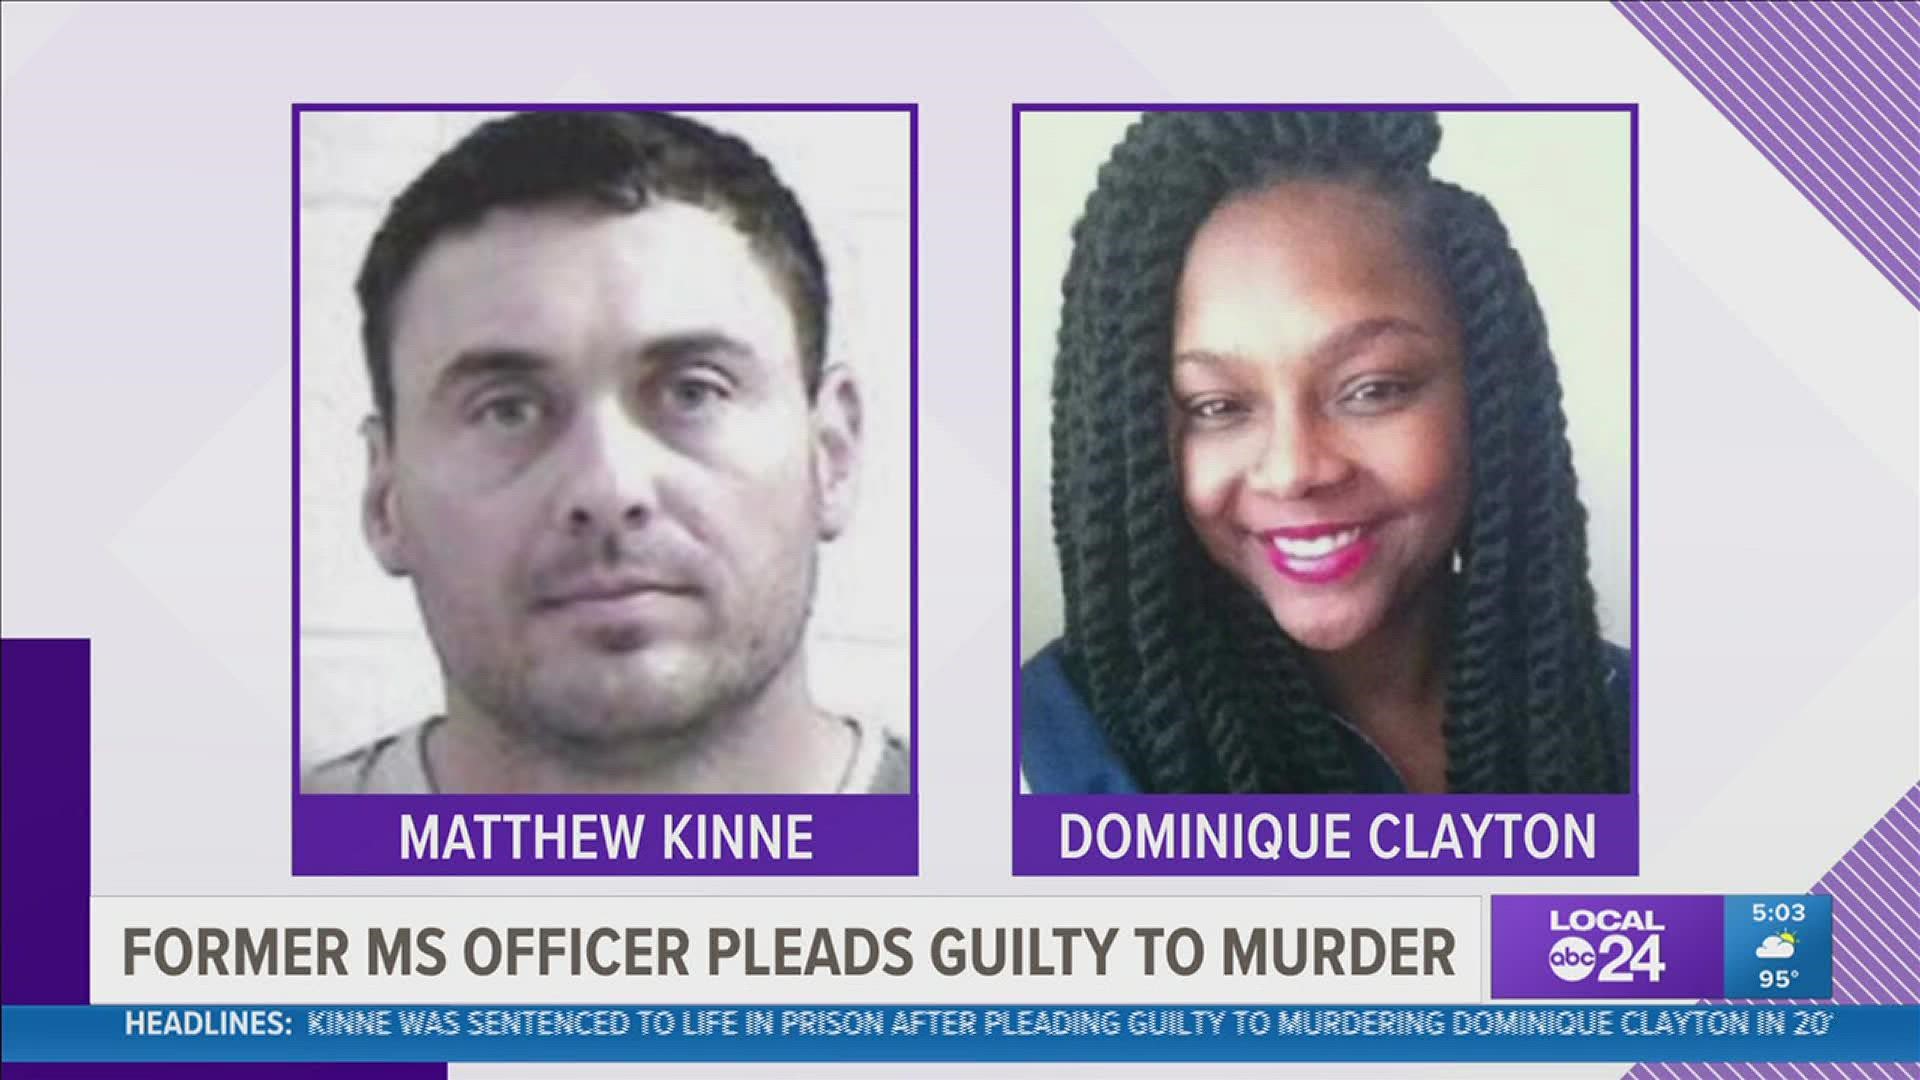 Matthew Kinne was charged with killing Dominique Clayton - a mother of four - in 2019. Her family said they were romantically linked.